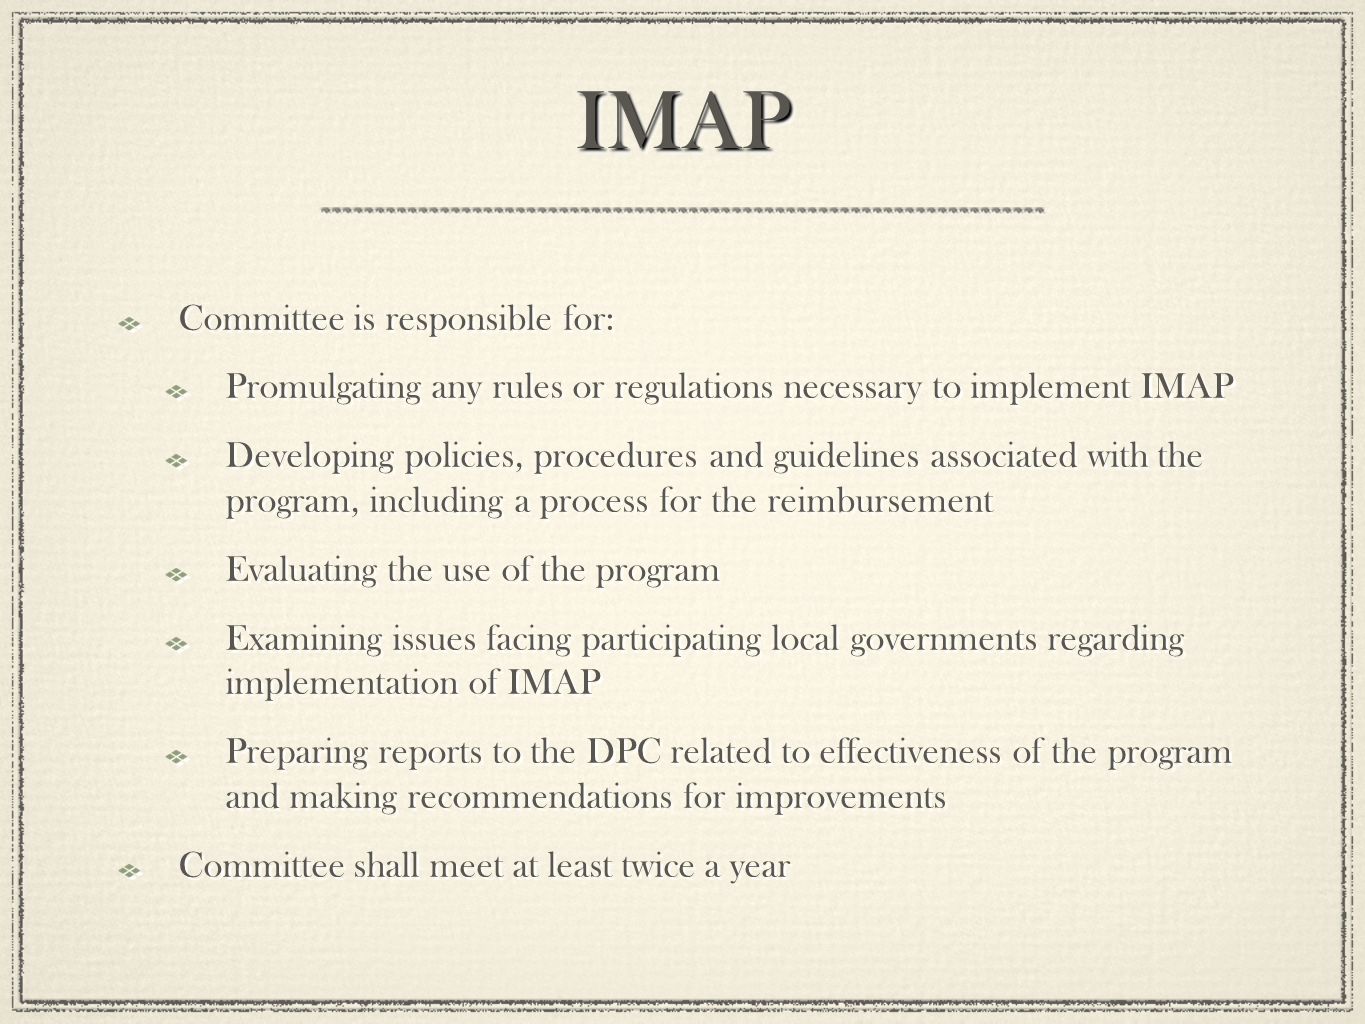 IMAPIMAP Committee is responsible for: Promulgating any rules or regulations necessary to implement IMAP Developing policies, procedures and guidelines associated with the program, including a process for the reimbursement Evaluating the use of the program Examining issues facing participating local governments regarding implementation of IMAP Preparing reports to the DPC related to effectiveness of the program and making recommendations for improvements Committee shall meet at least twice a year Committee is responsible for: Promulgating any rules or regulations necessary to implement IMAP Developing policies, procedures and guidelines associated with the program, including a process for the reimbursement Evaluating the use of the program Examining issues facing participating local governments regarding implementation of IMAP Preparing reports to the DPC related to effectiveness of the program and making recommendations for improvements Committee shall meet at least twice a year